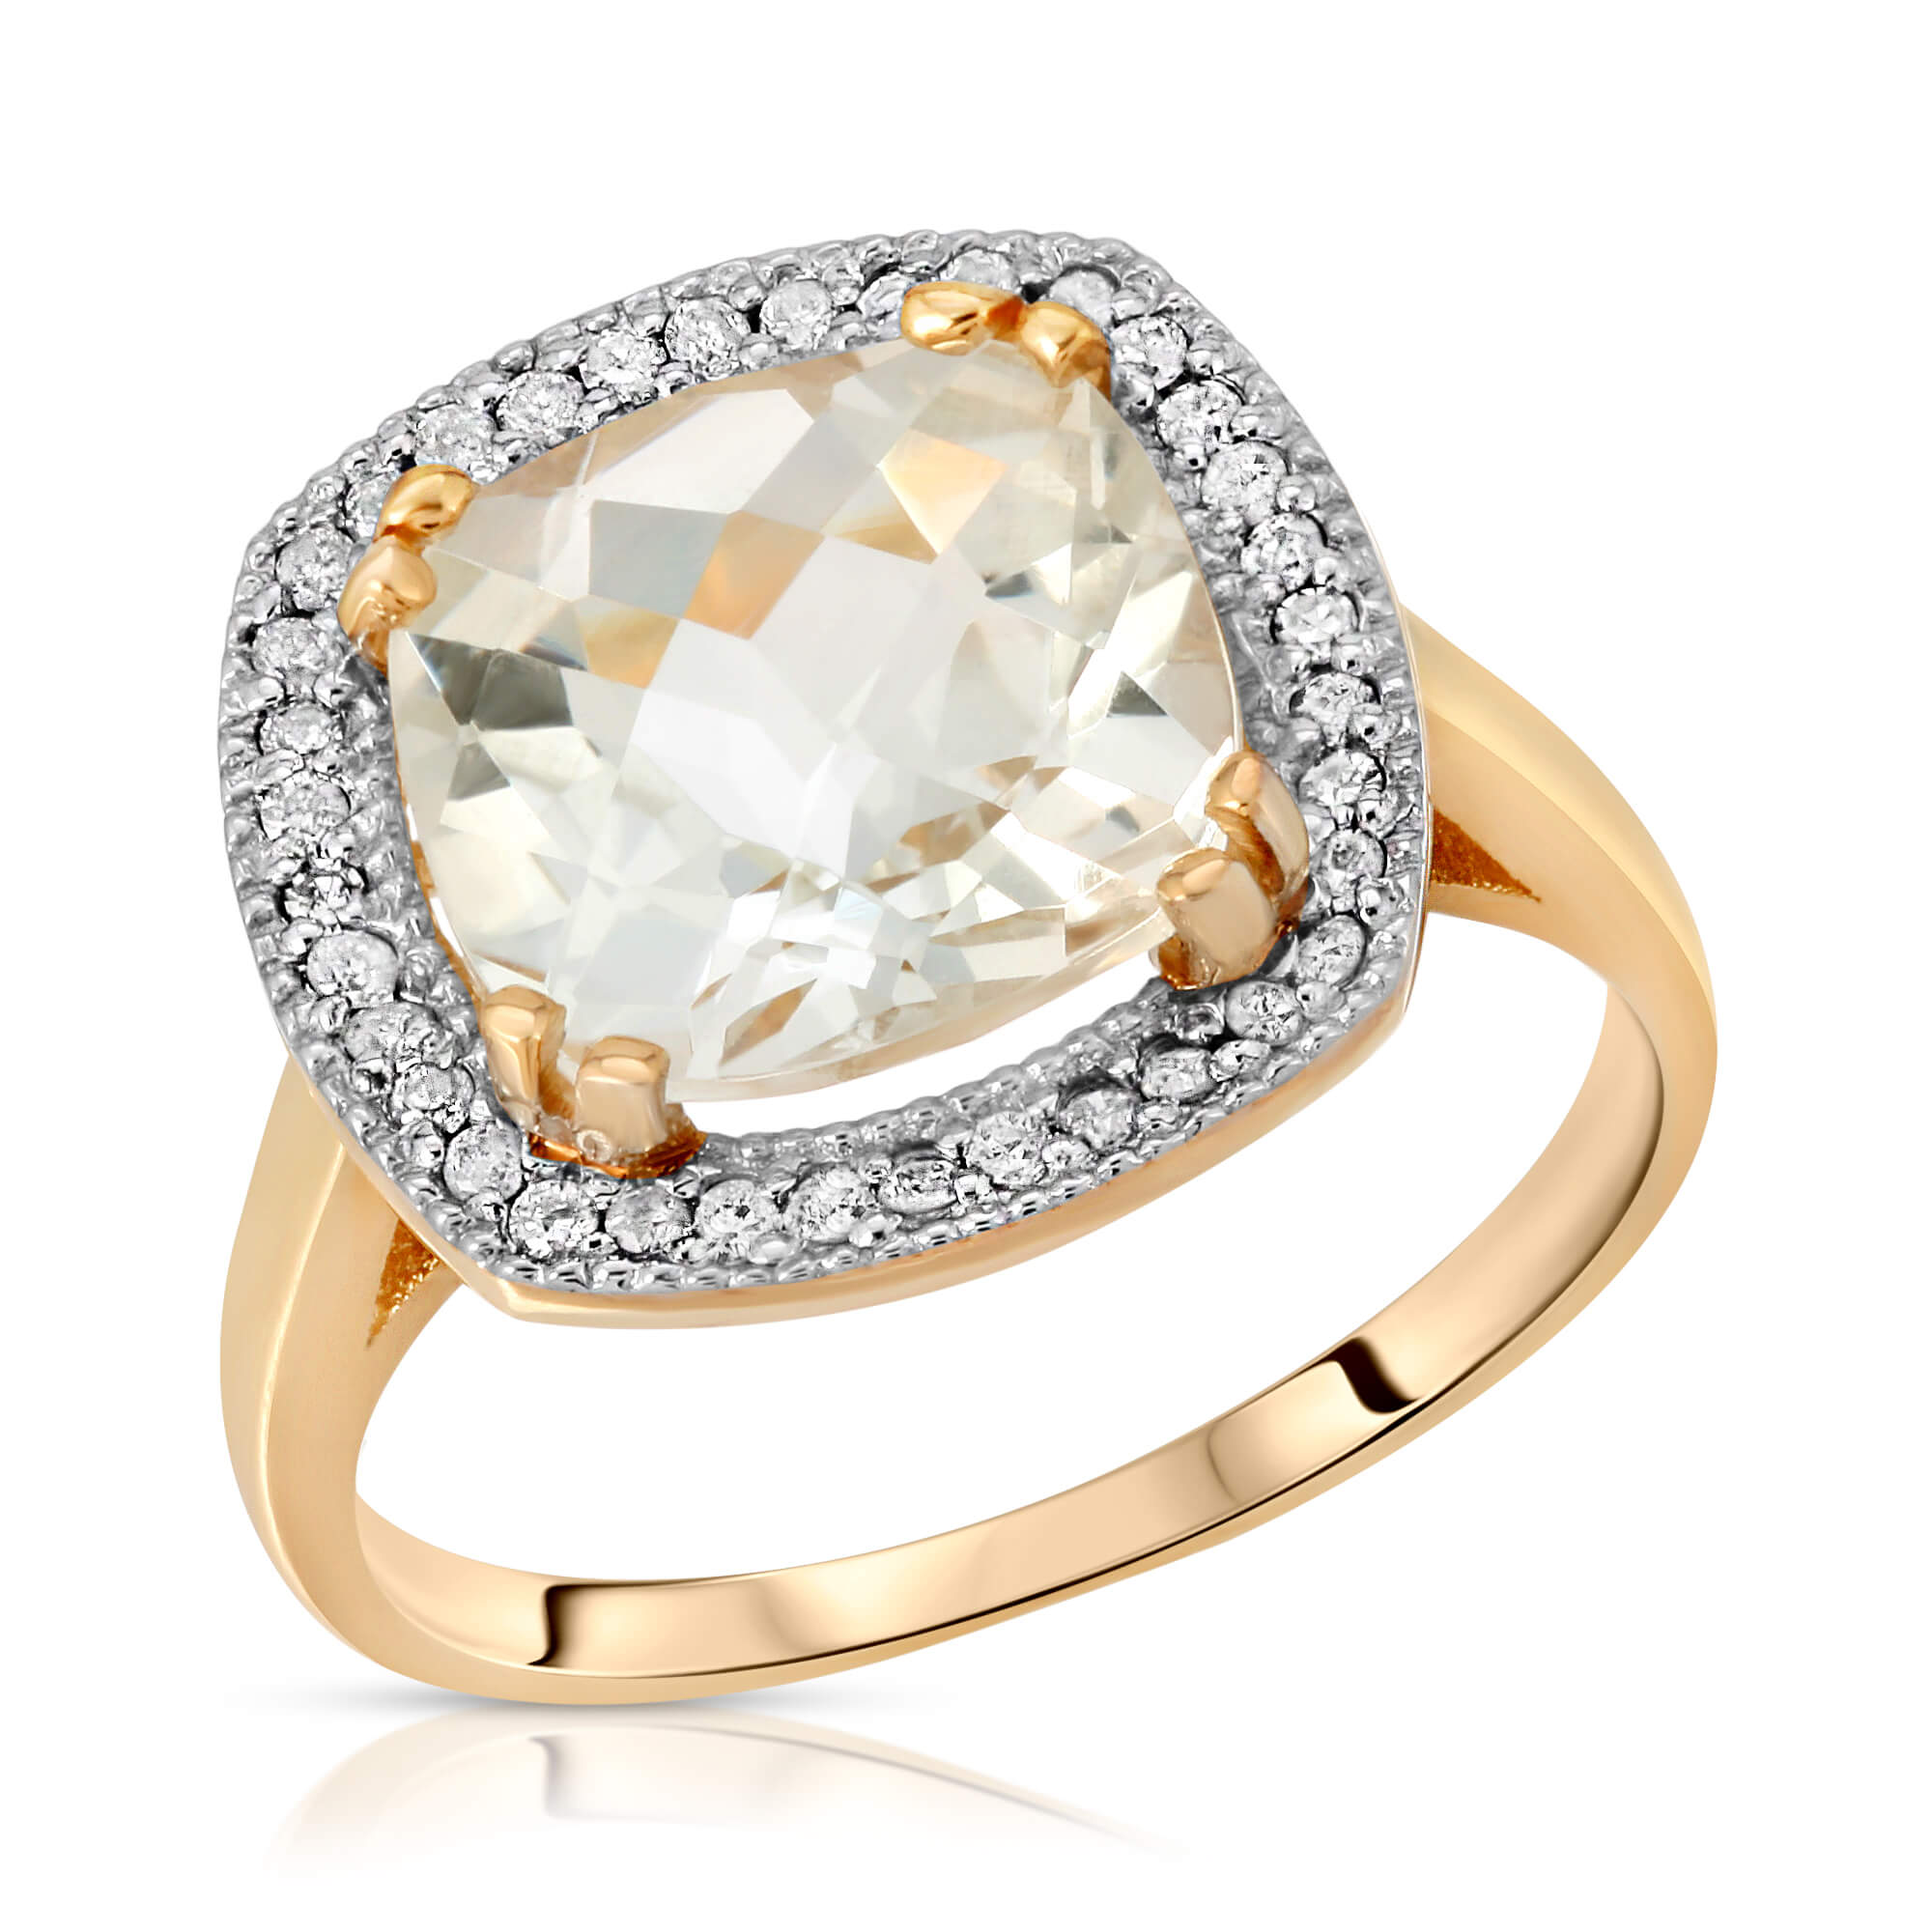 Cushion Cut White Topaz Ring 5.2 ctw in 18ct Gold